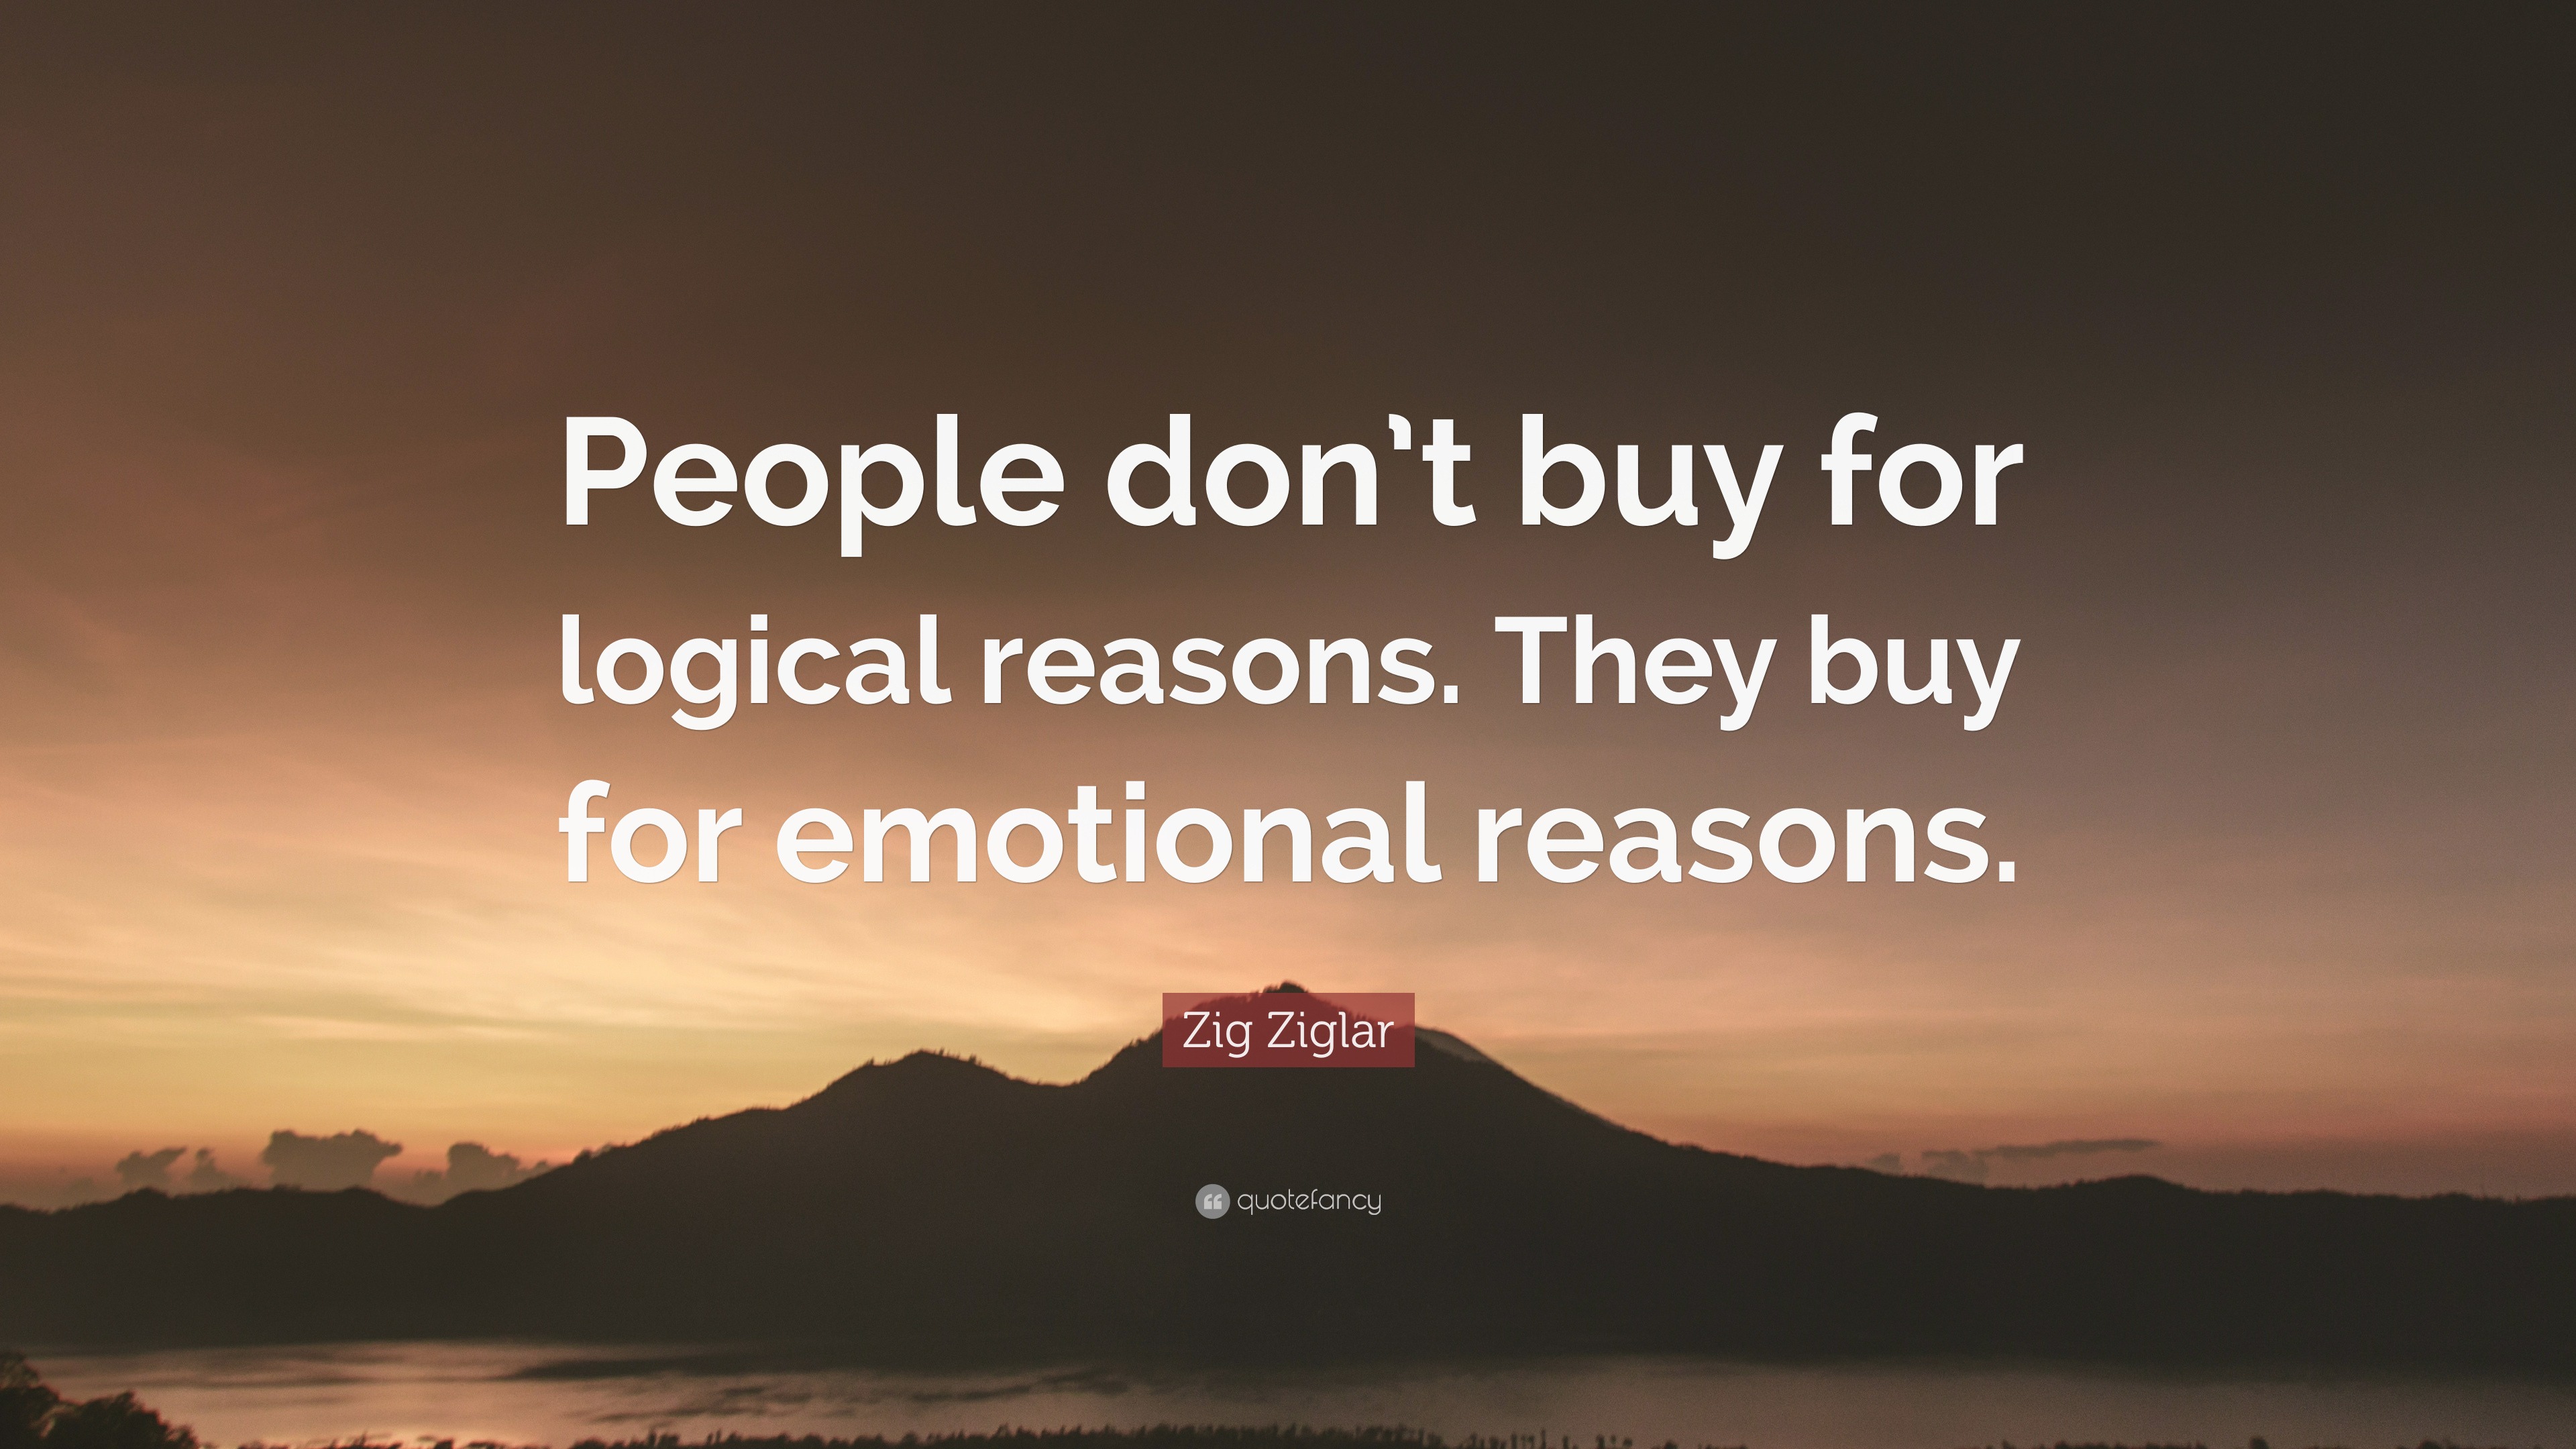 Zig Ziglar Quote: "People don’t buy for logical reasons. The